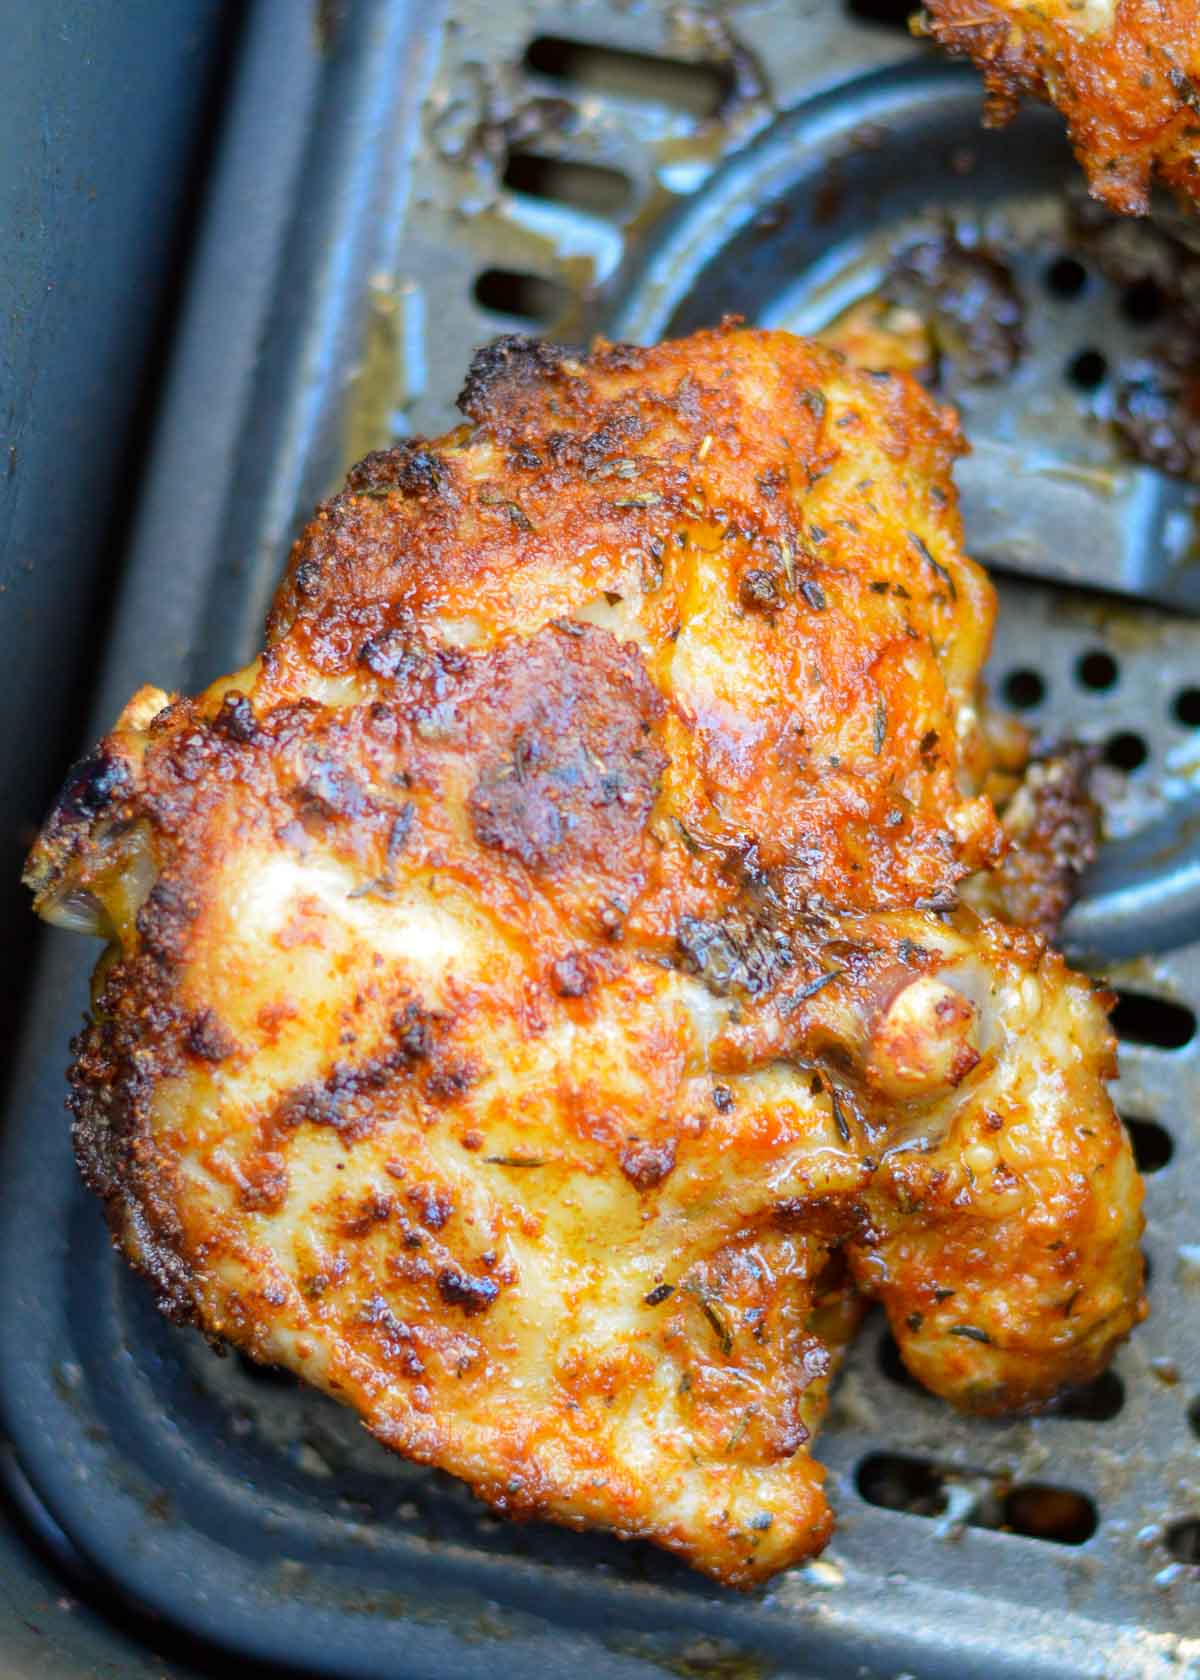 These amazing Air Fryer Cajun Chicken Thighs are super juicy, tender, and ready in just 20 minutes! Easy, inexpensive, gluten-free, keto, and perfect for a busy weeknight.